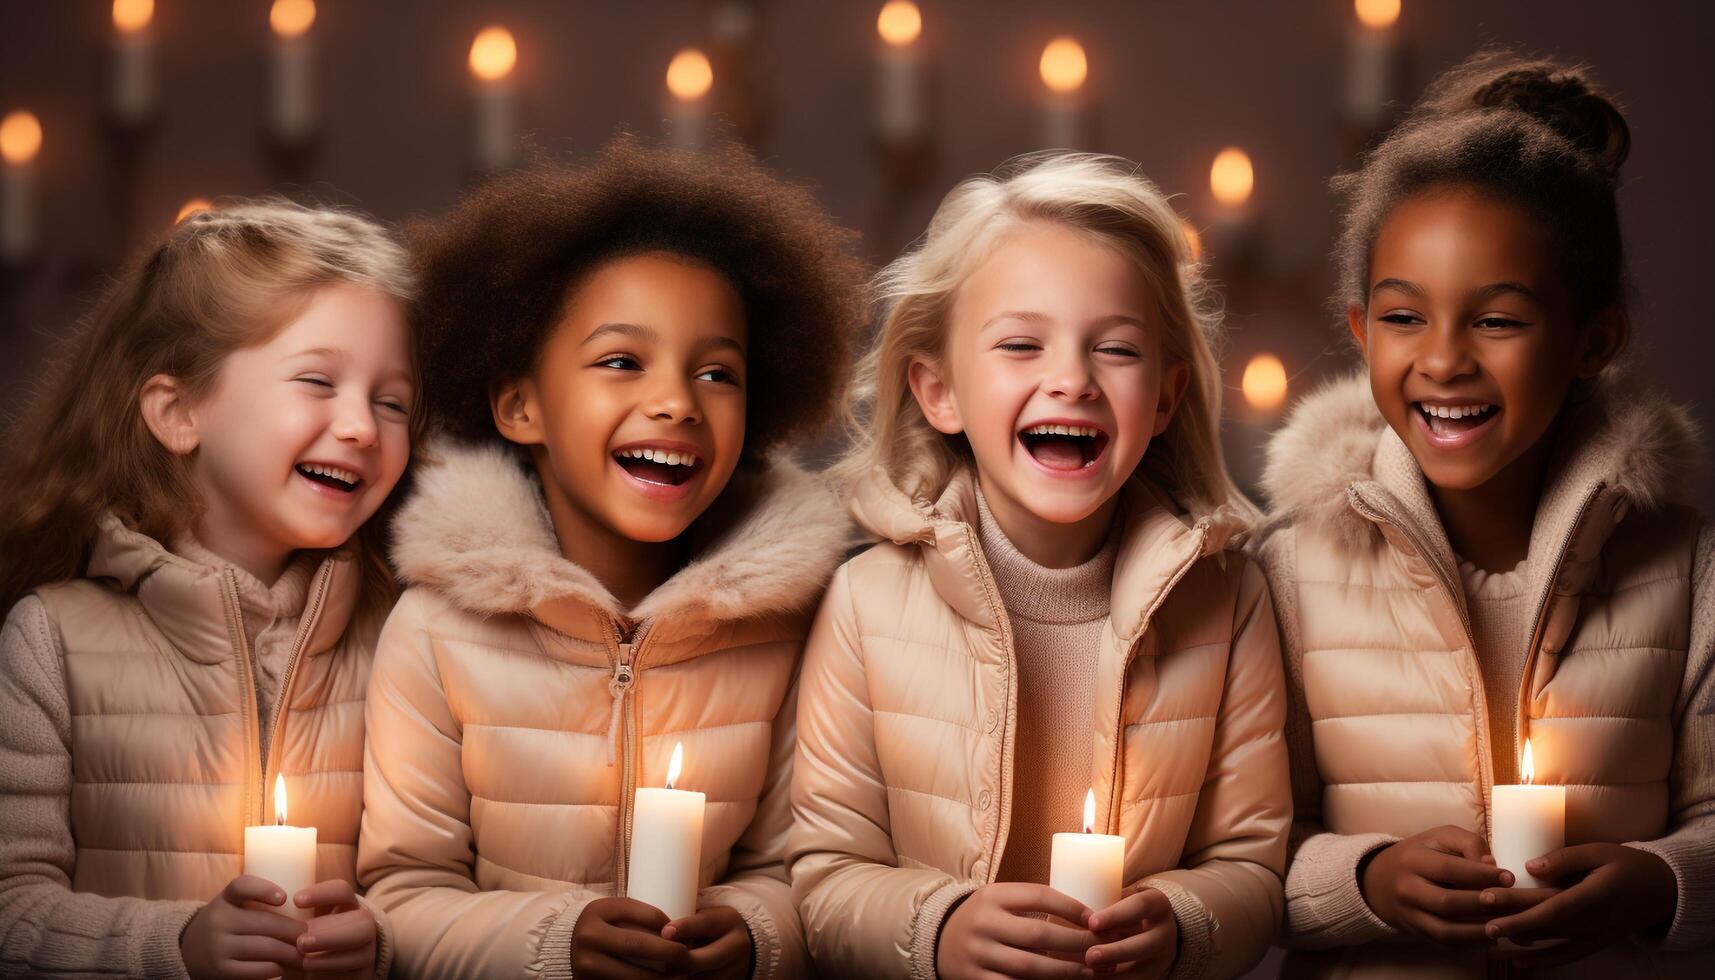 AI generated Smiling girls, cheerful boys, celebrating childhood, indoor flame, winter joy generated by AI photo